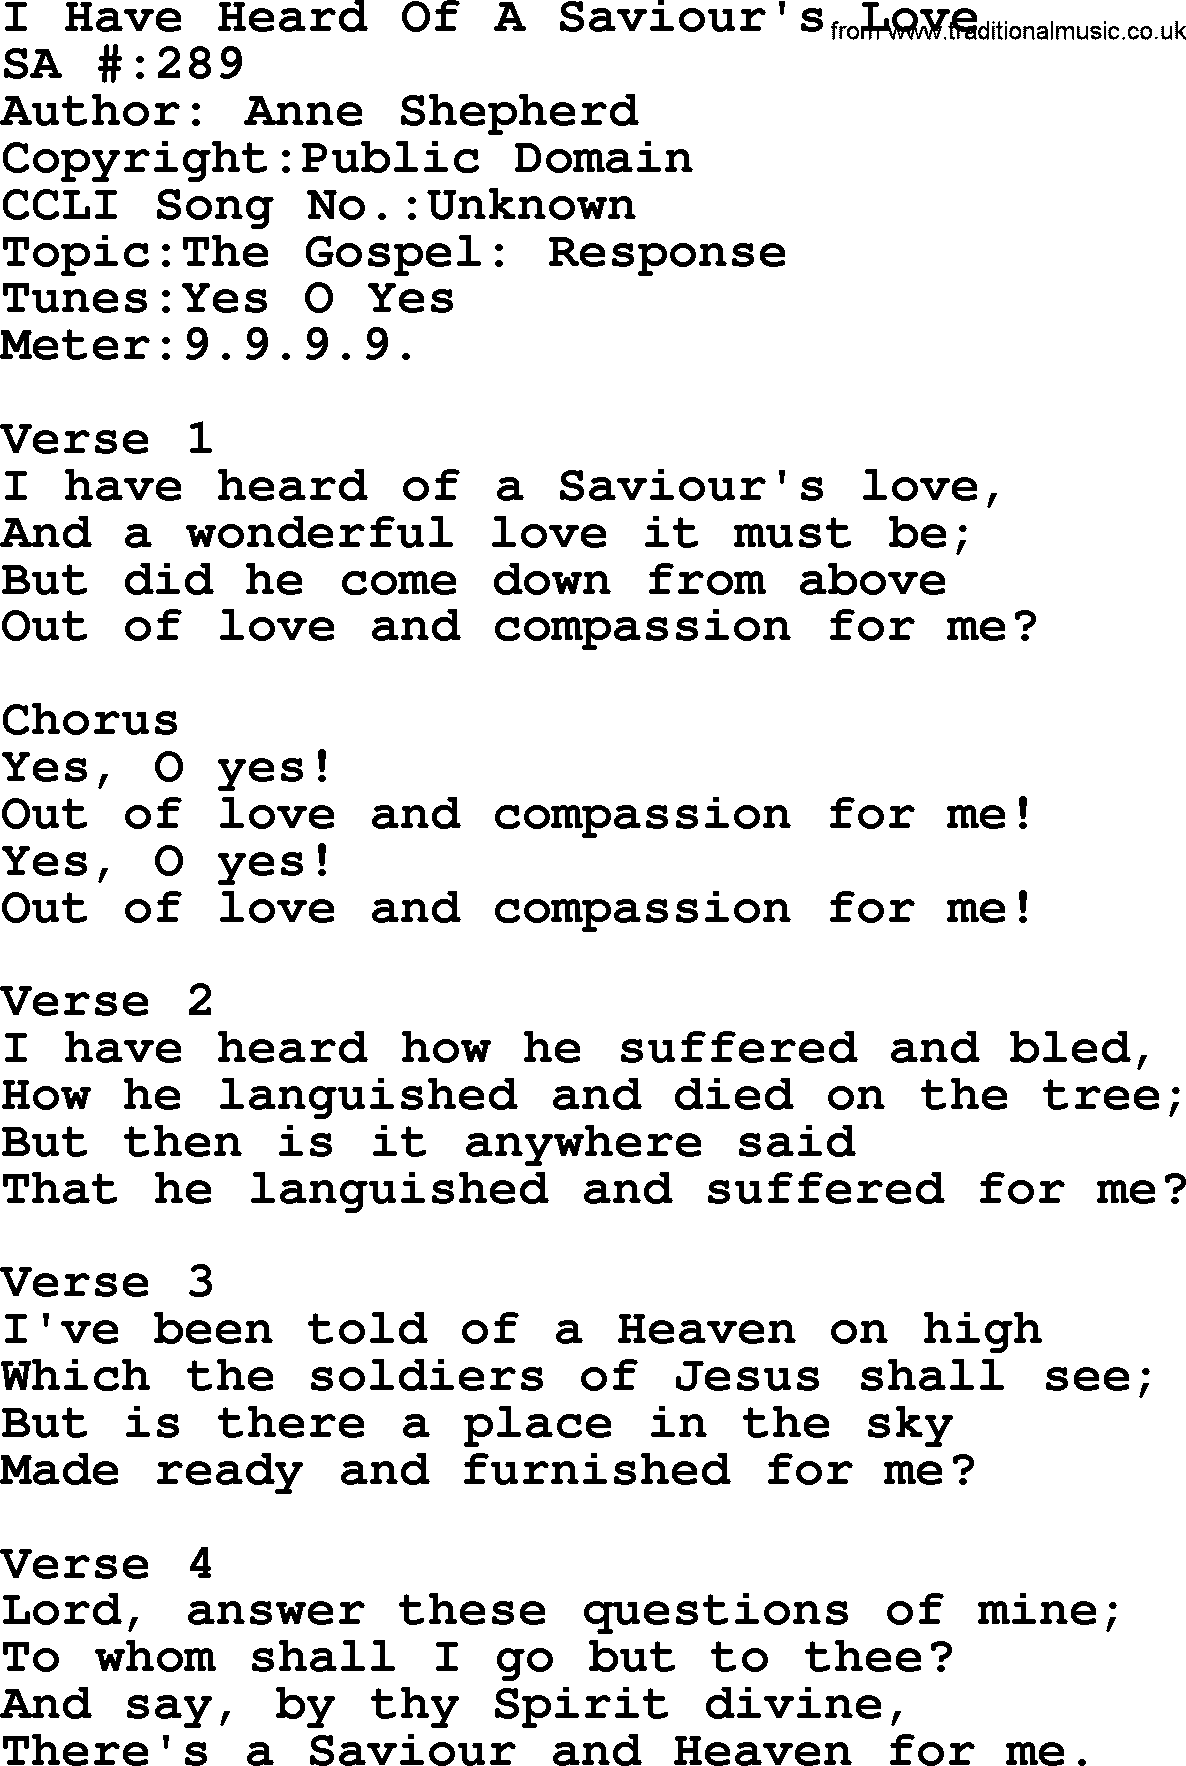 Salvation Army Hymnal, title: I Have Heard Of A Saviour's Love, with lyrics and PDF,